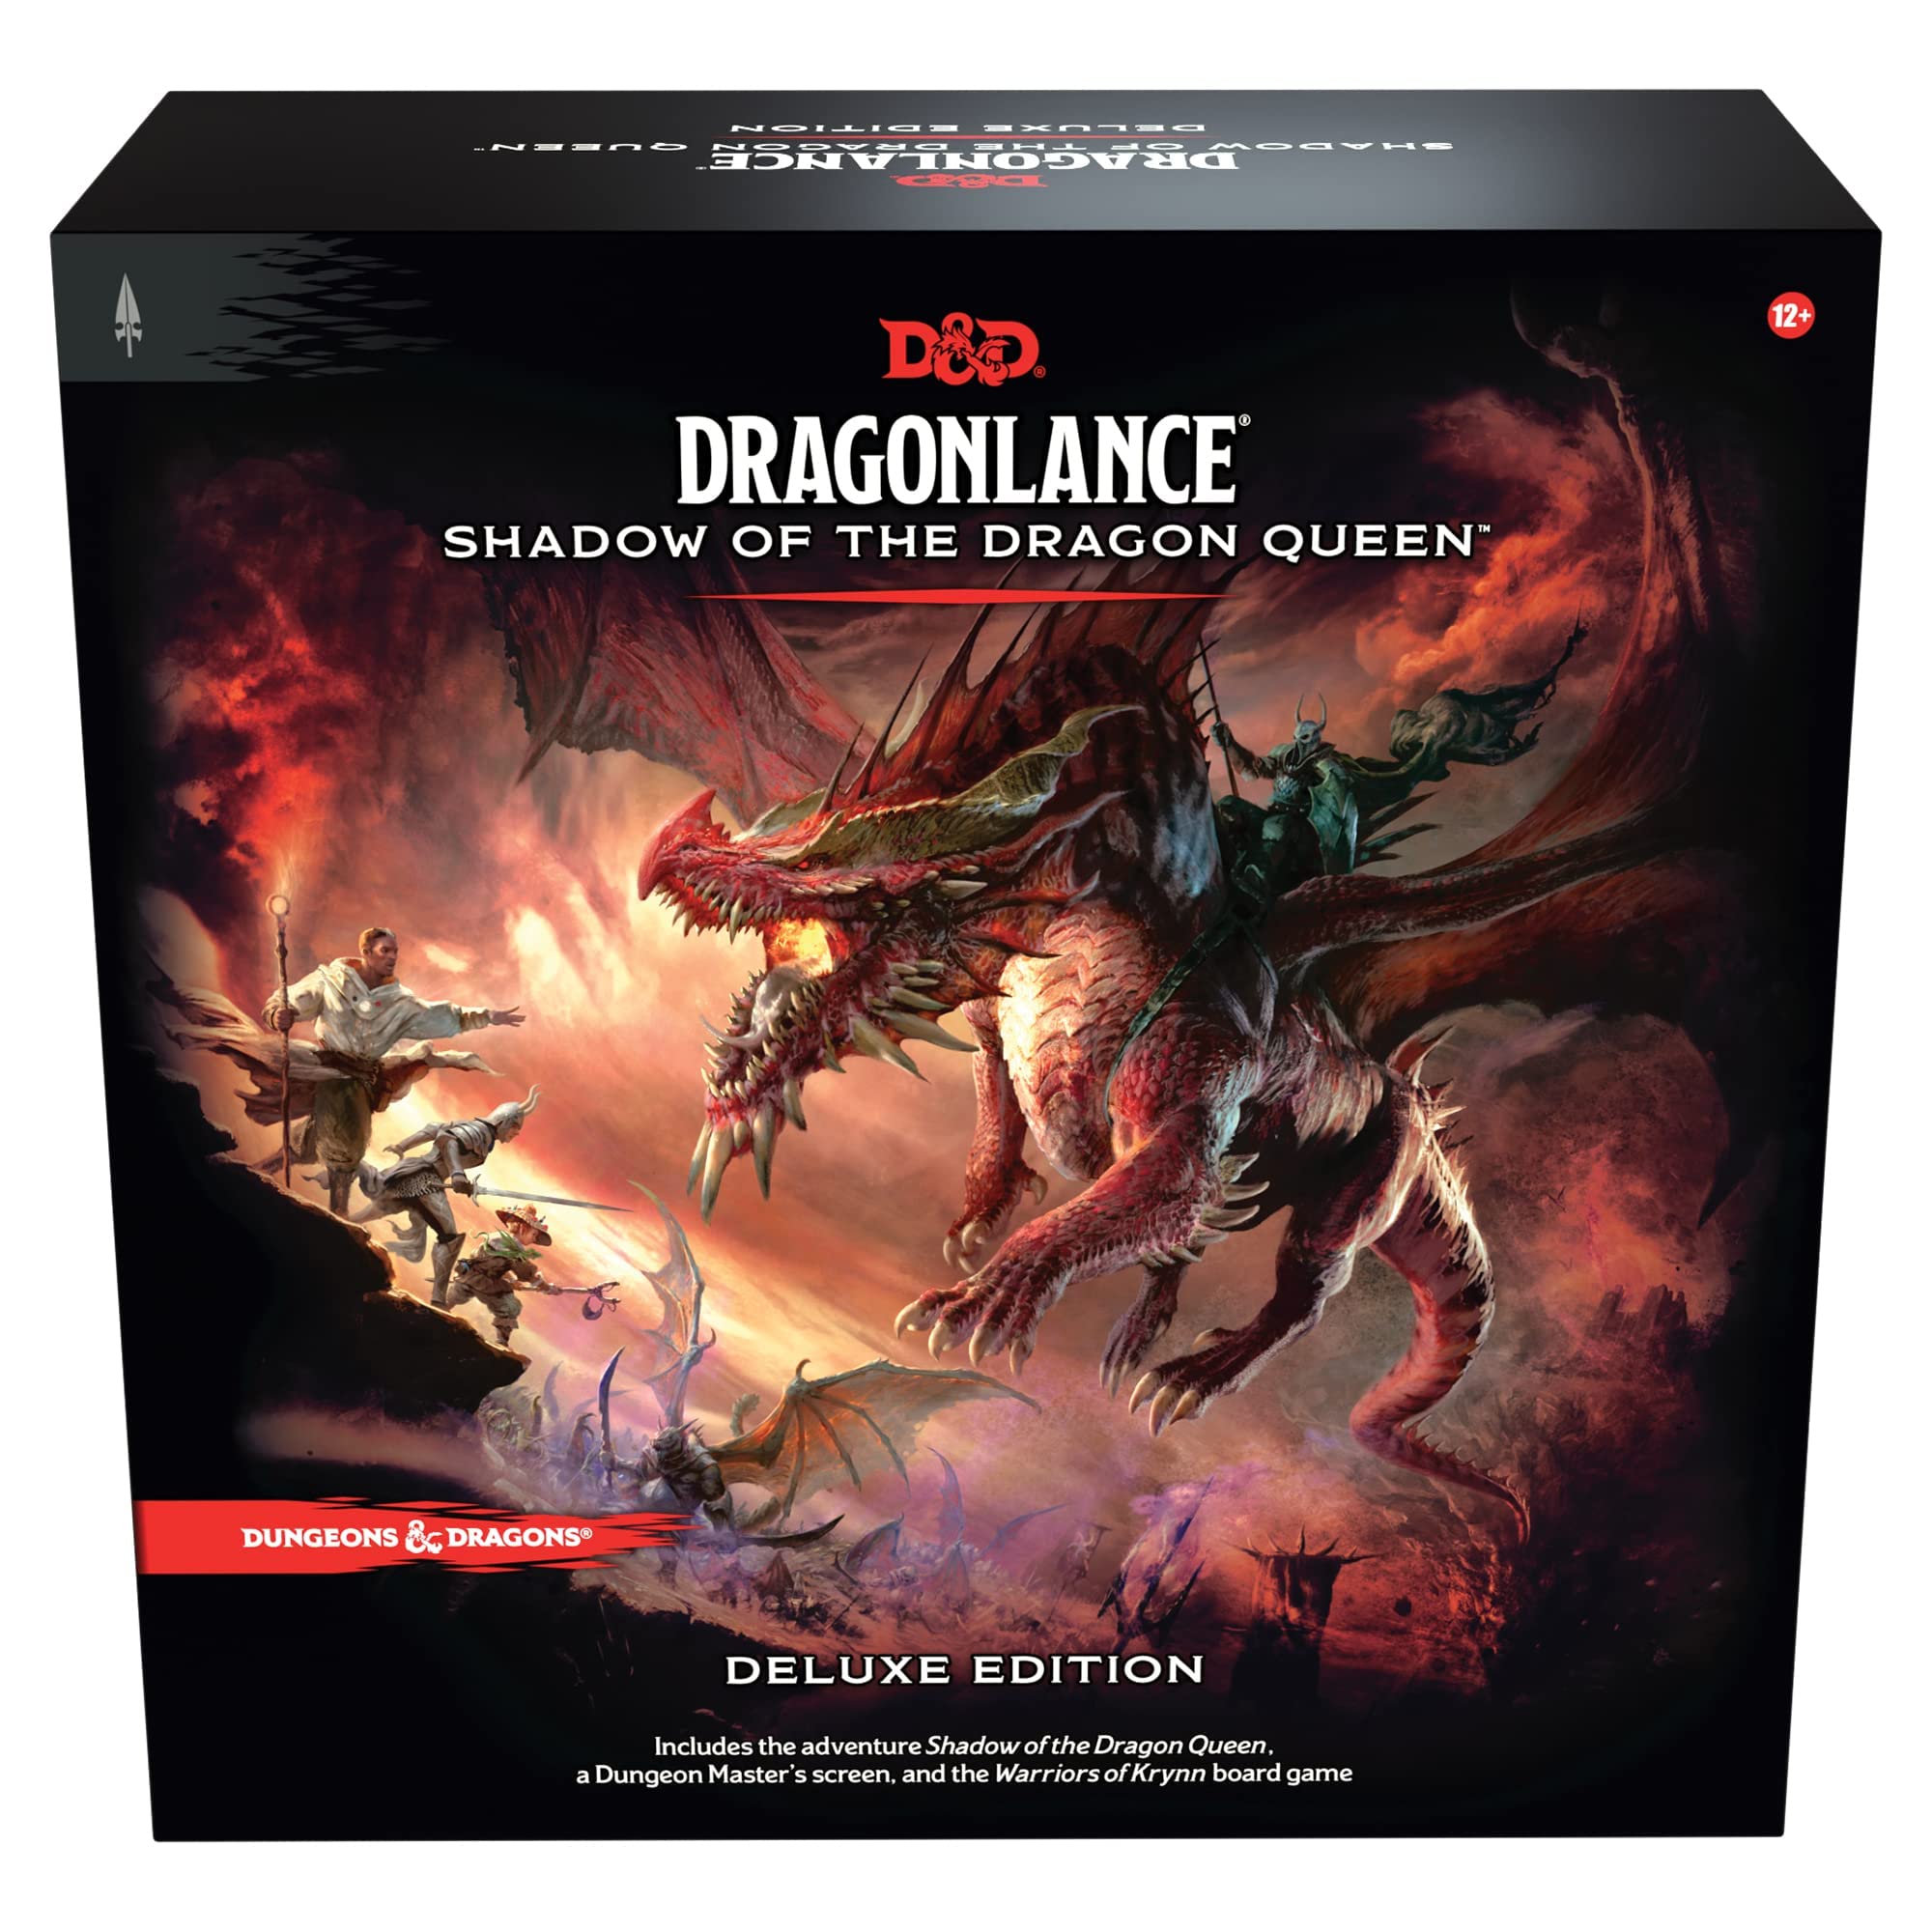 Dungeons & Dragons 5th Edition - Dragonlance: Shadow of the Dragon Queen - Deluxe Edition Bundle